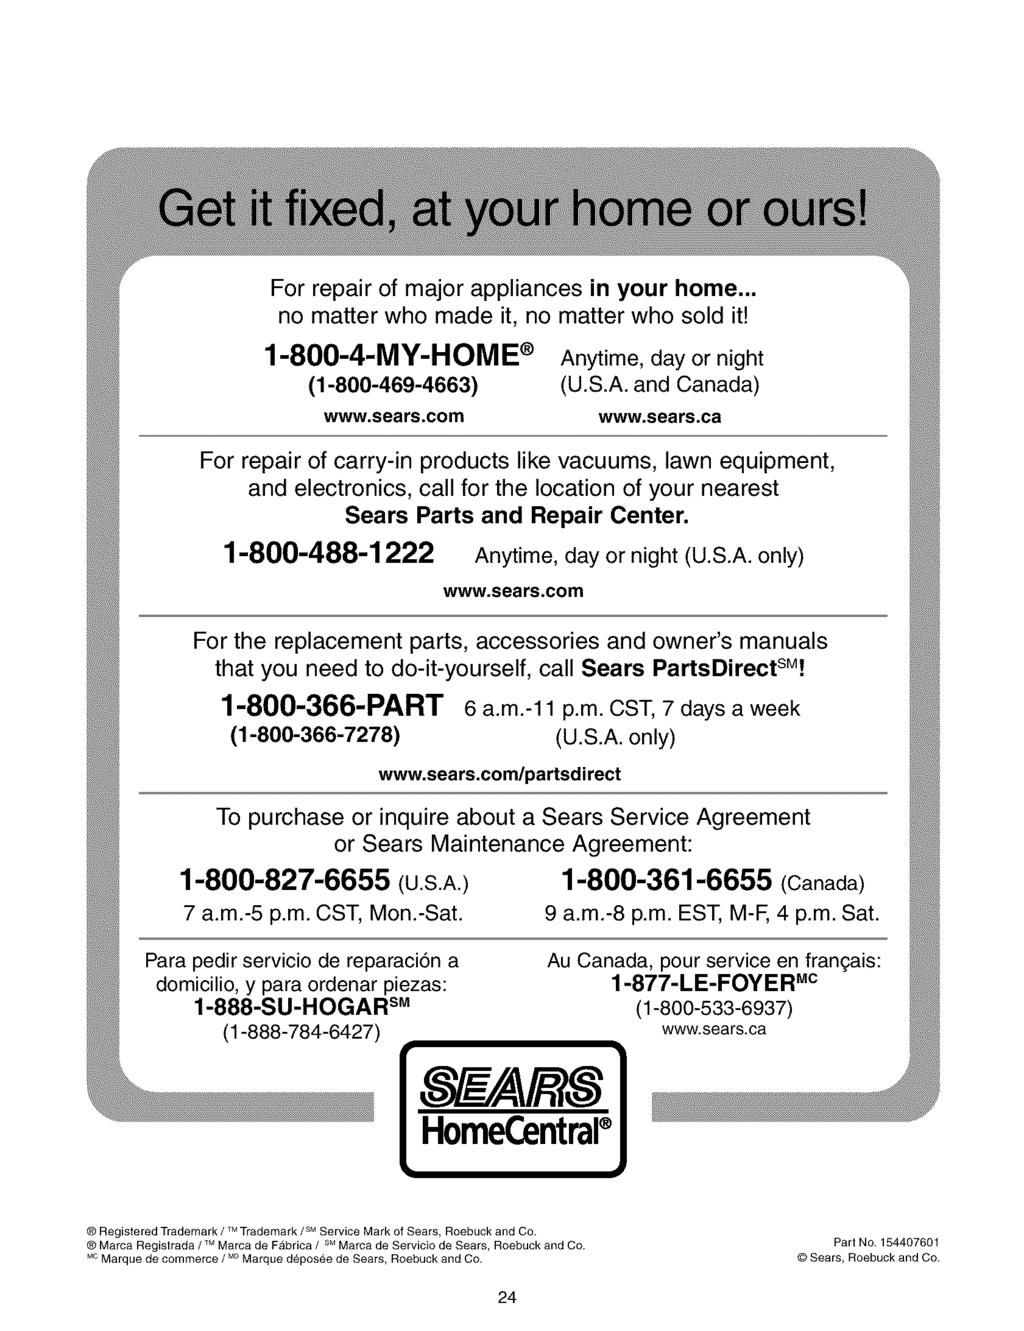 For repair of major appliances in your home... no matter who made it, no matter who sold it! 1-800-4-MY-HOME Anytime, day or night (1-800-469-4663) (U.S.A. and Canada) www.sears.